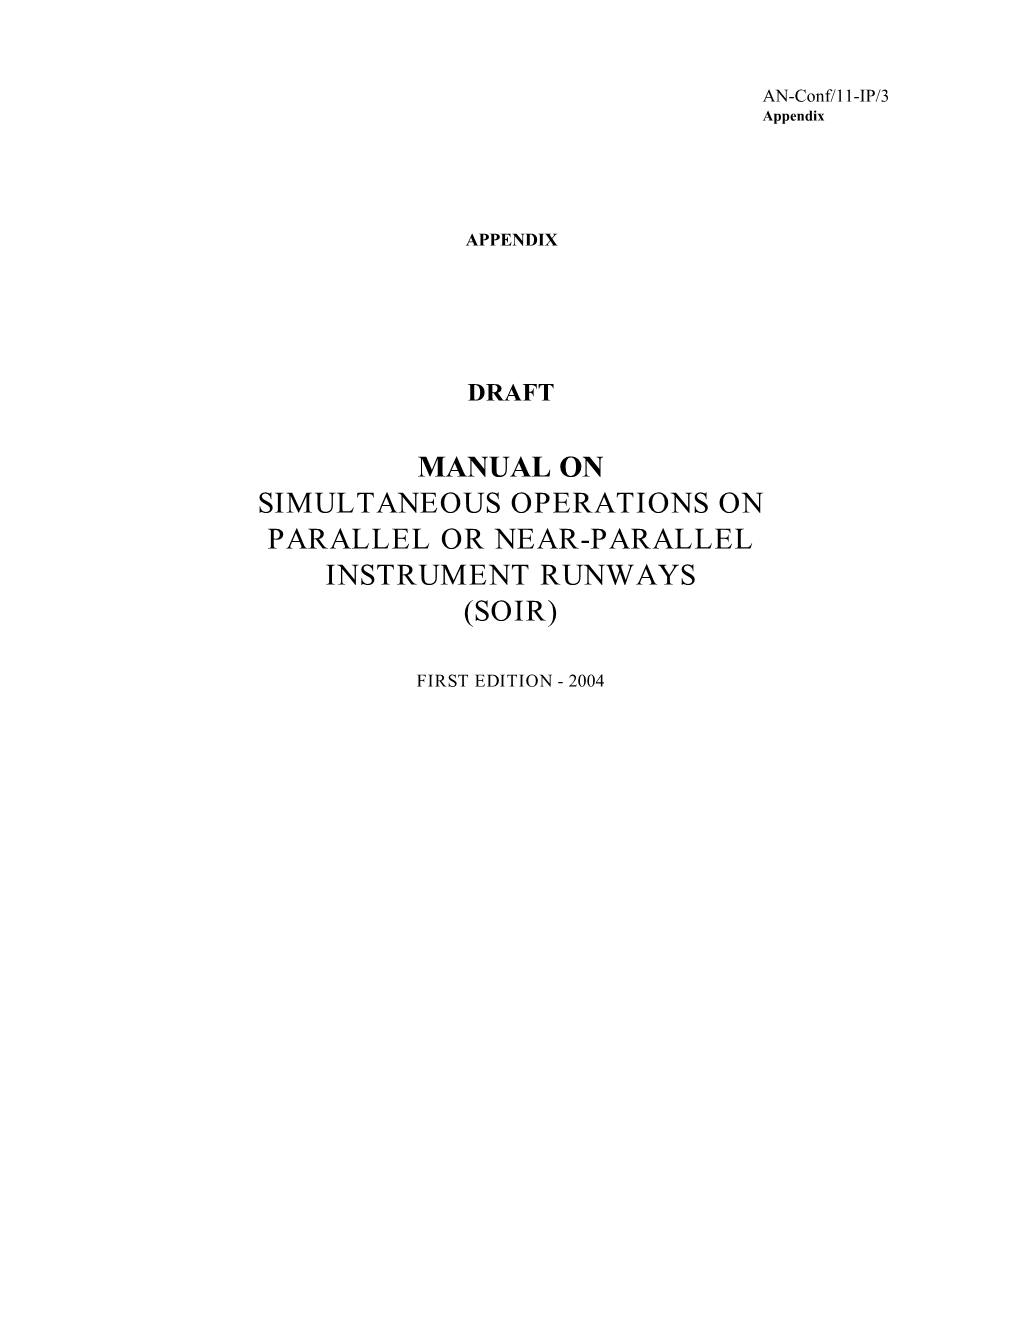 Manual on Simultaneous Operations on Parallel Or Near-Parallel Instrument Runways (Soir)